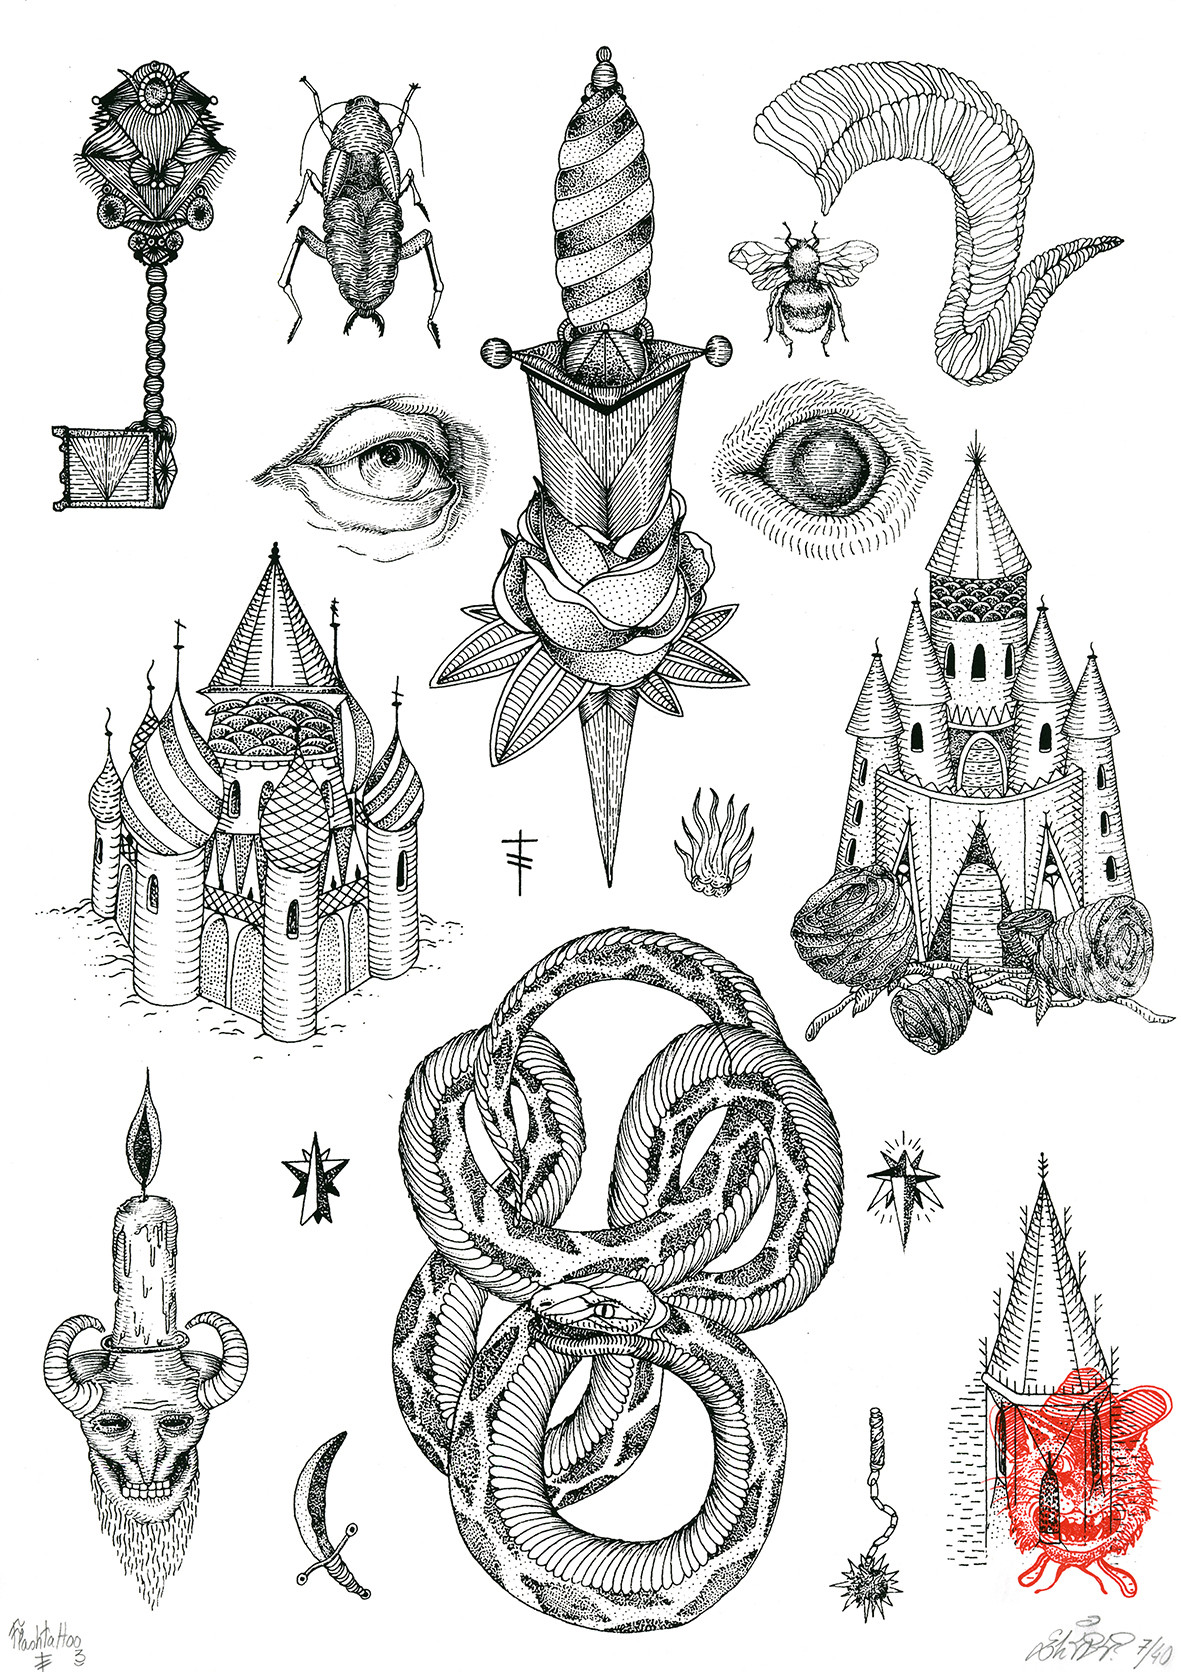 Hey Im a tattooist based in paris and a fan of from software games Here  are some flash designs and tattoos I did which I hope youll enjoy   rfromsoftware